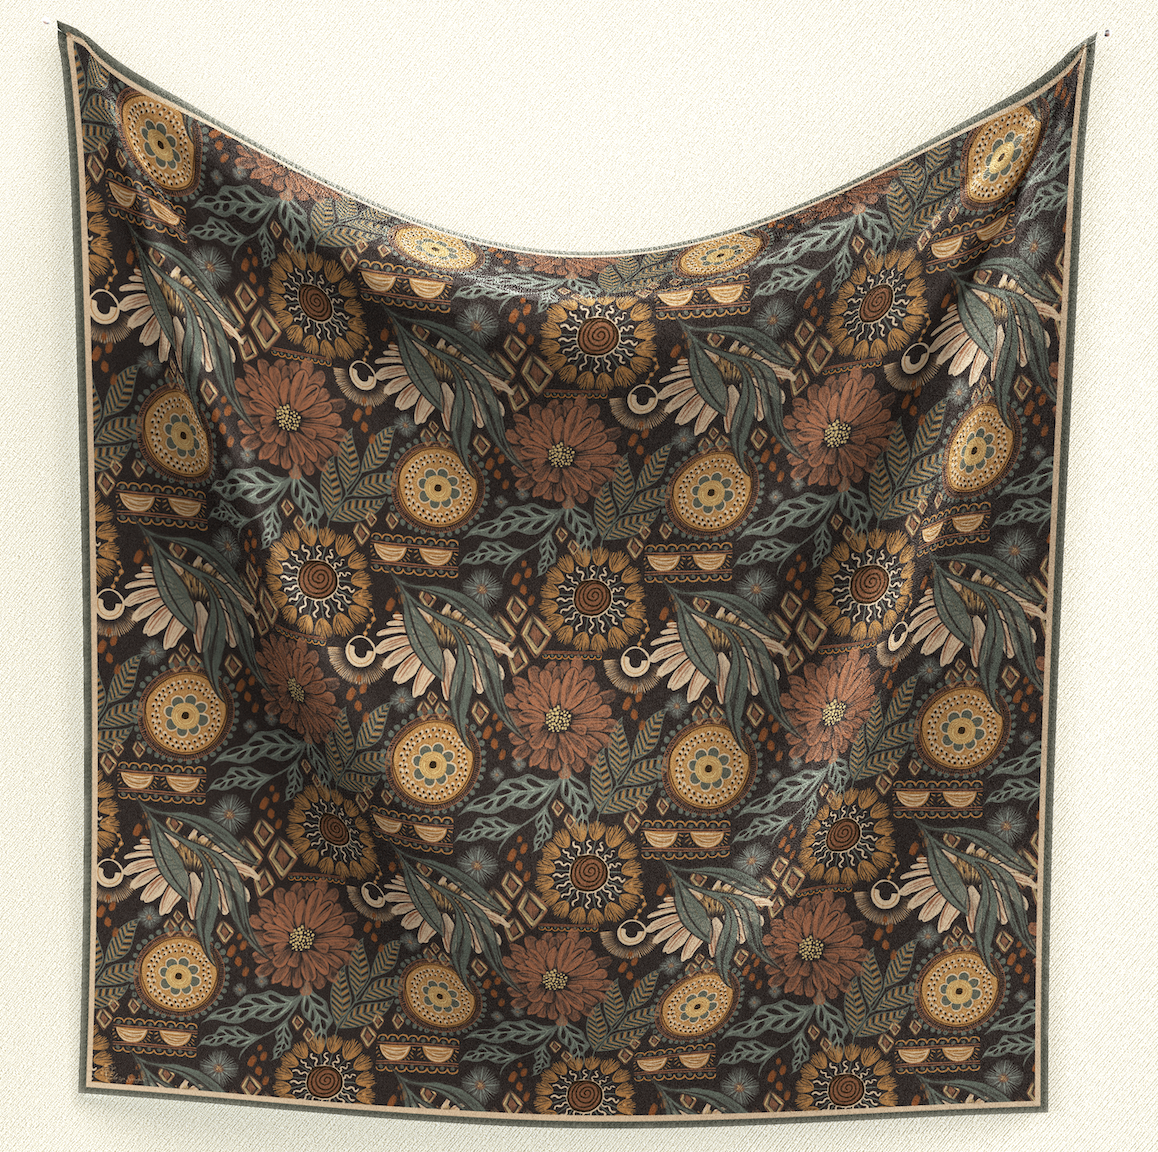 Bohemian Bliss Wild Rag: Indulge in luxury with this 35" square scarf crafted from extra fine poly/mulberry silk. Adorned with a boho daisy and medallion print, its versatile design complements any outfit or occasion. The earthy tones add a classic touch, making it a must-have accessory to elevate your wardrobe. #BohemianBliss #LuxuryFashion #WildRag